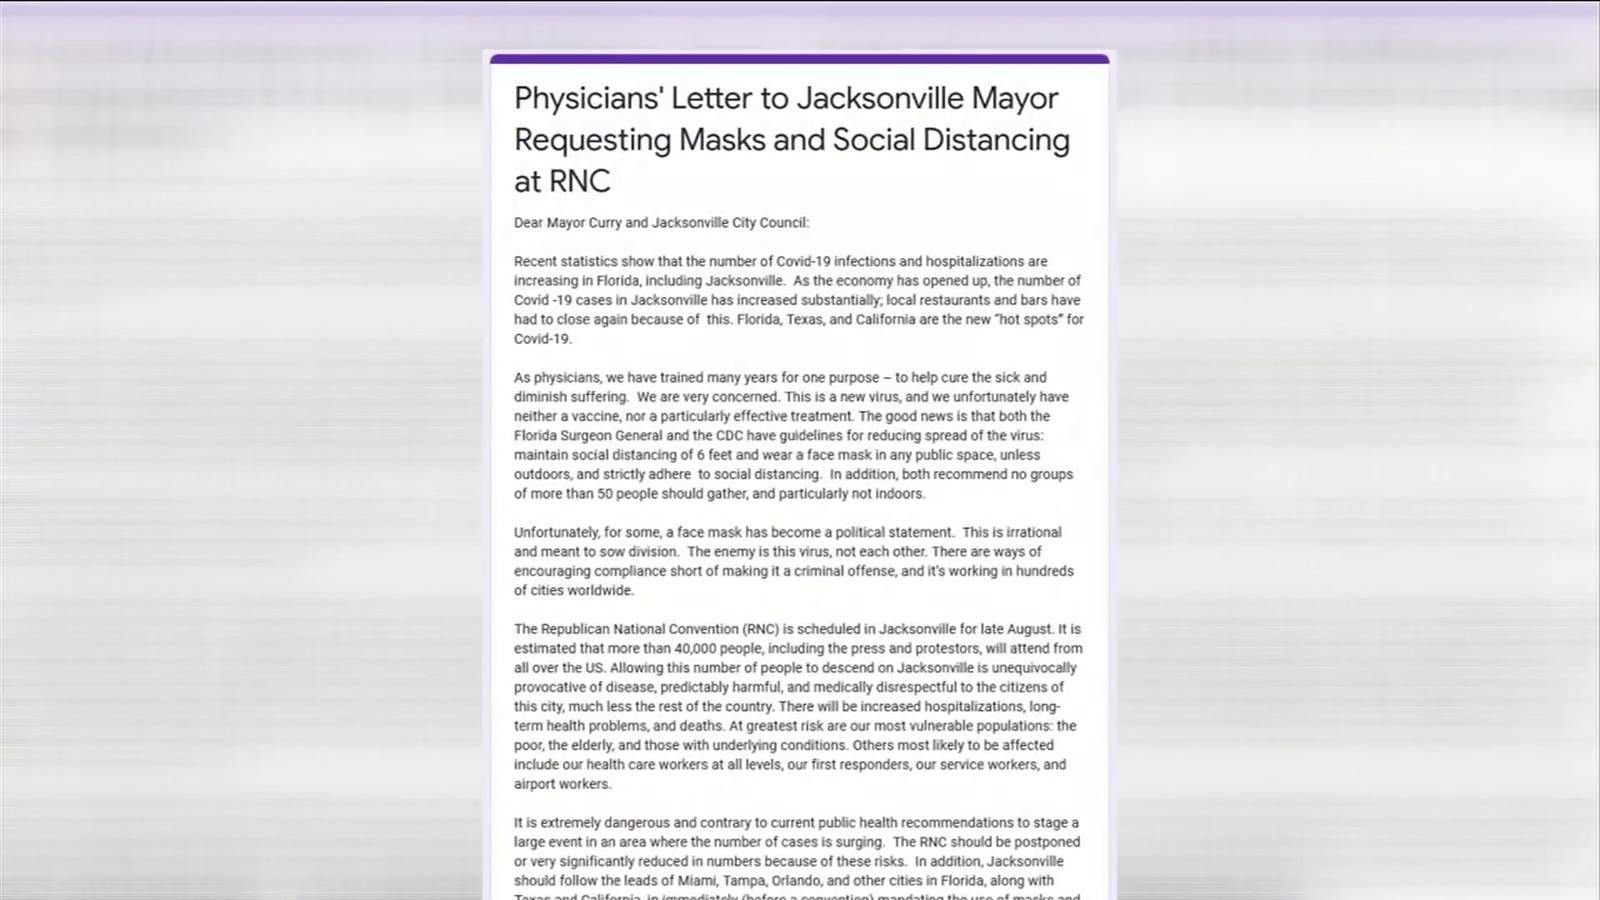 More doctors sign letter asking Jacksonville to require masks at RNC